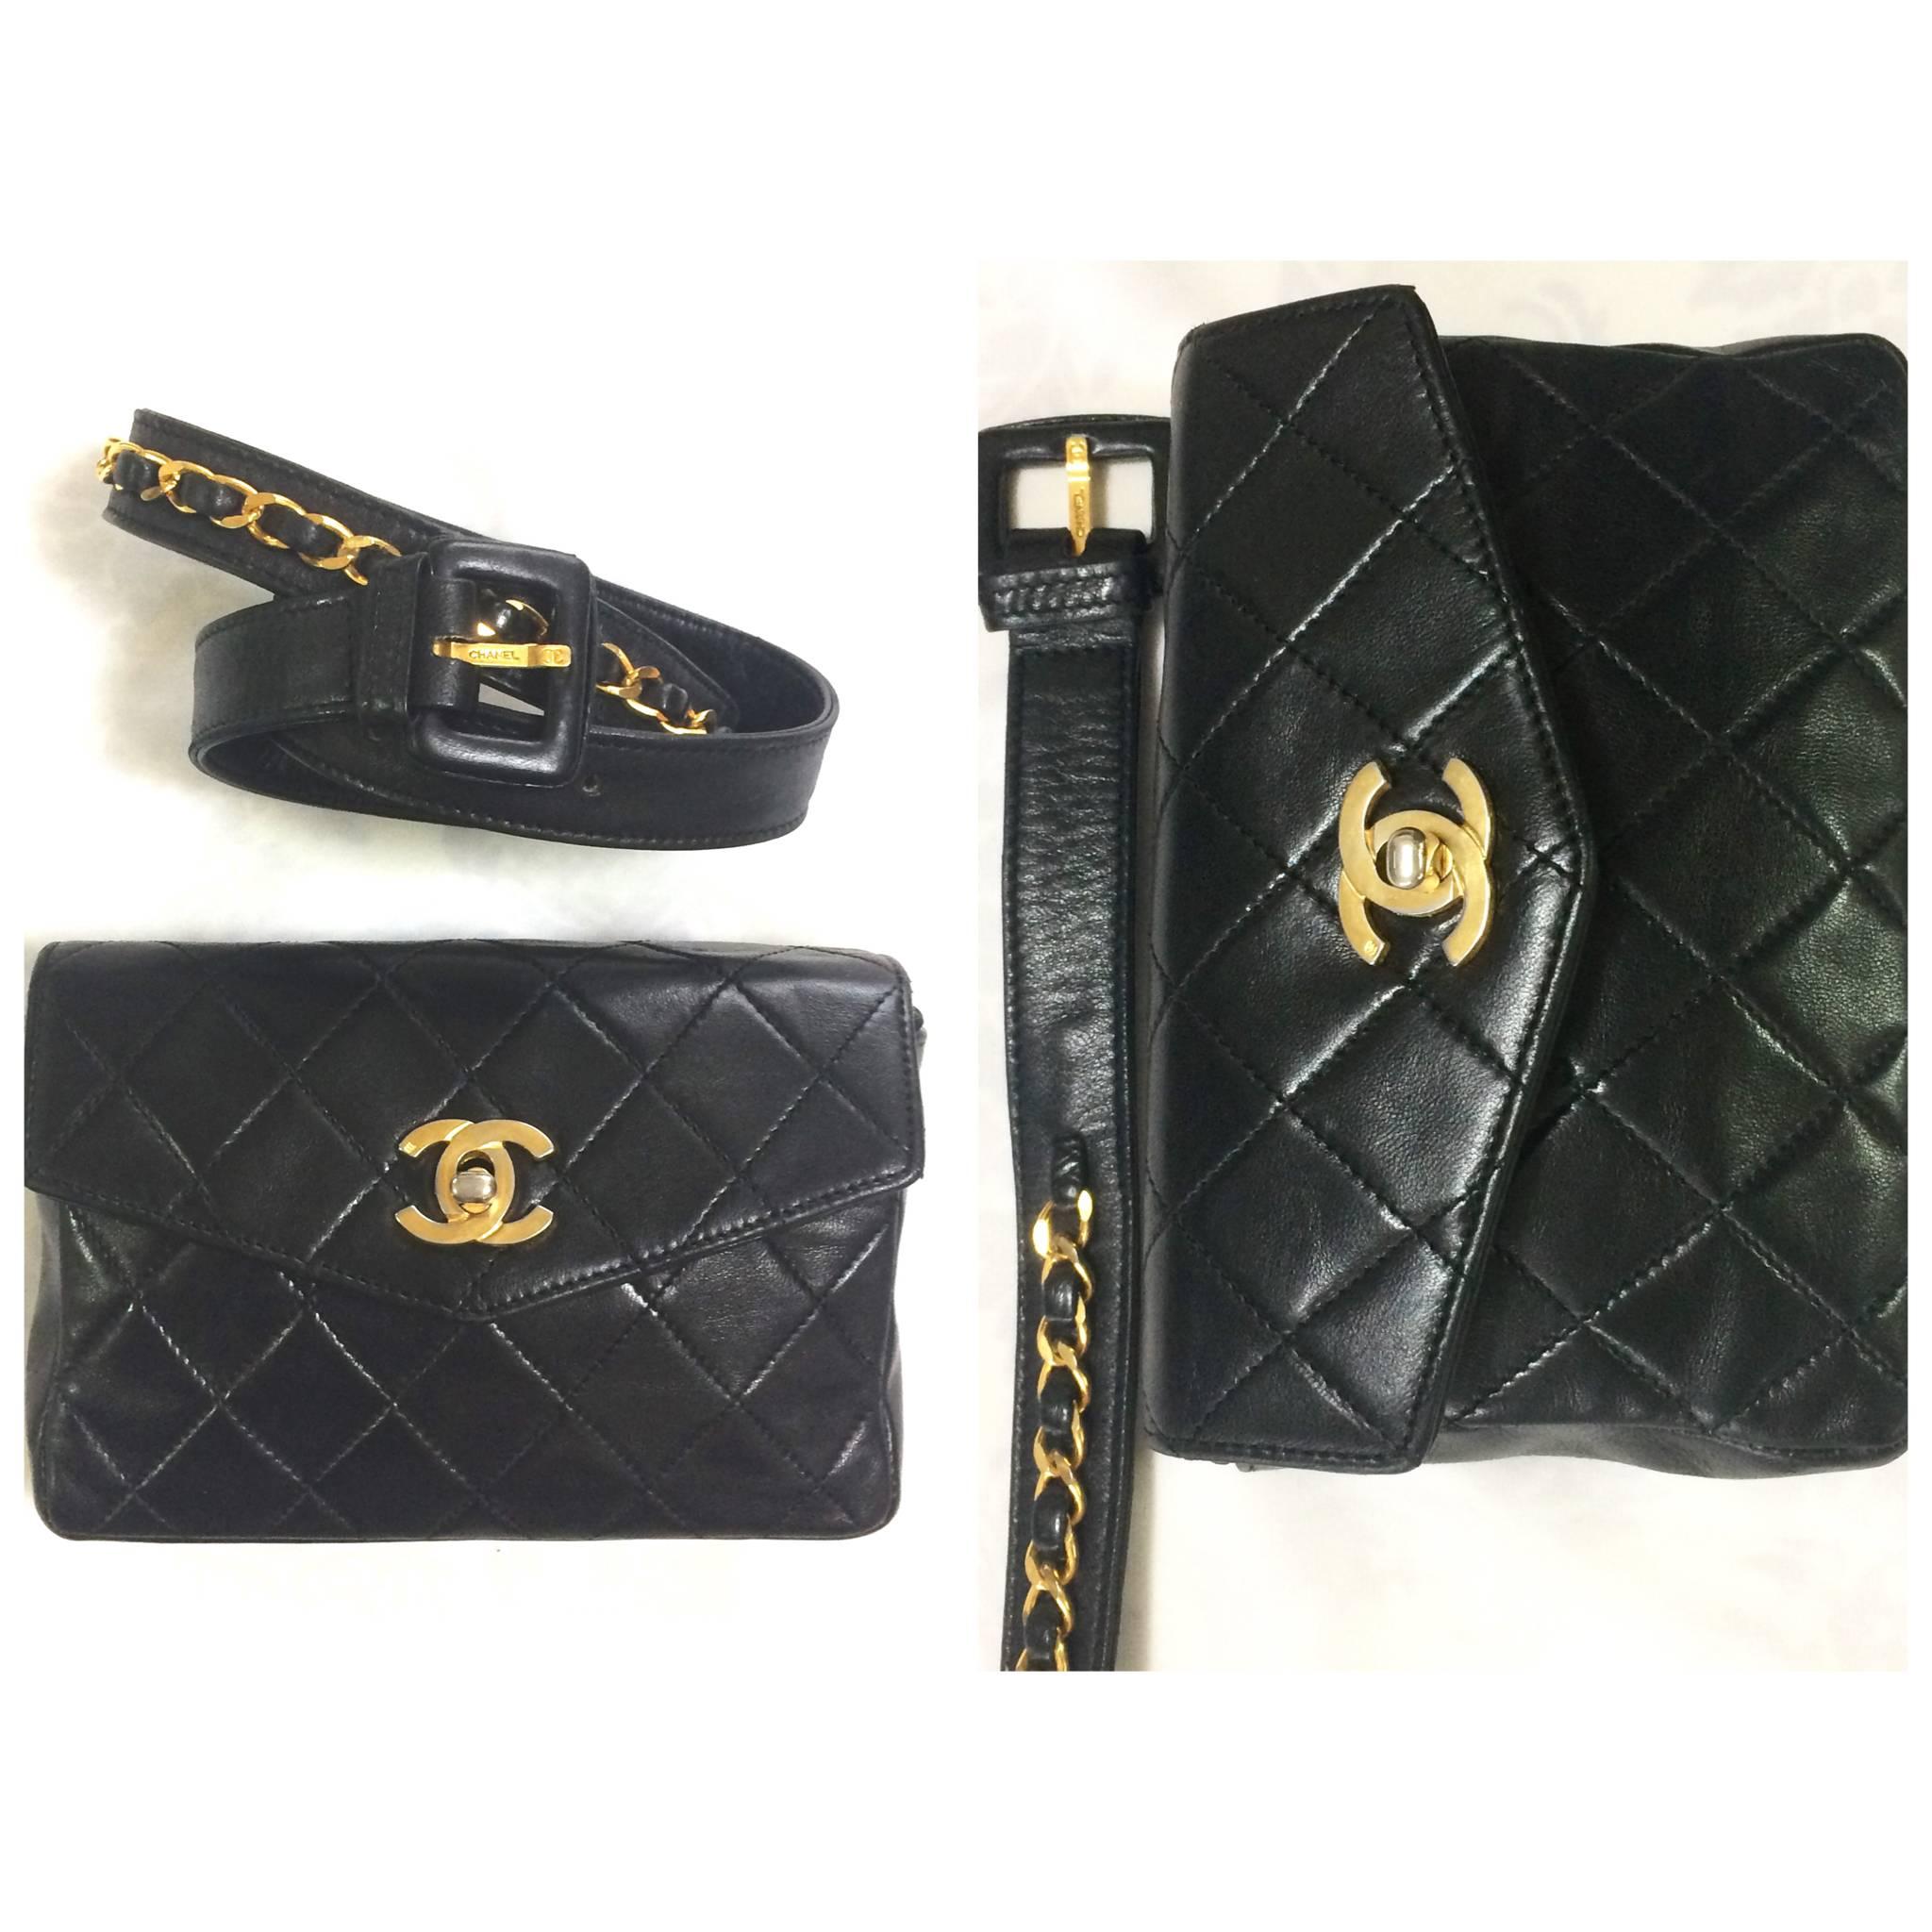 Black Vintage CHANEL black waist purse, fanny pack with golden CC and chain belt.